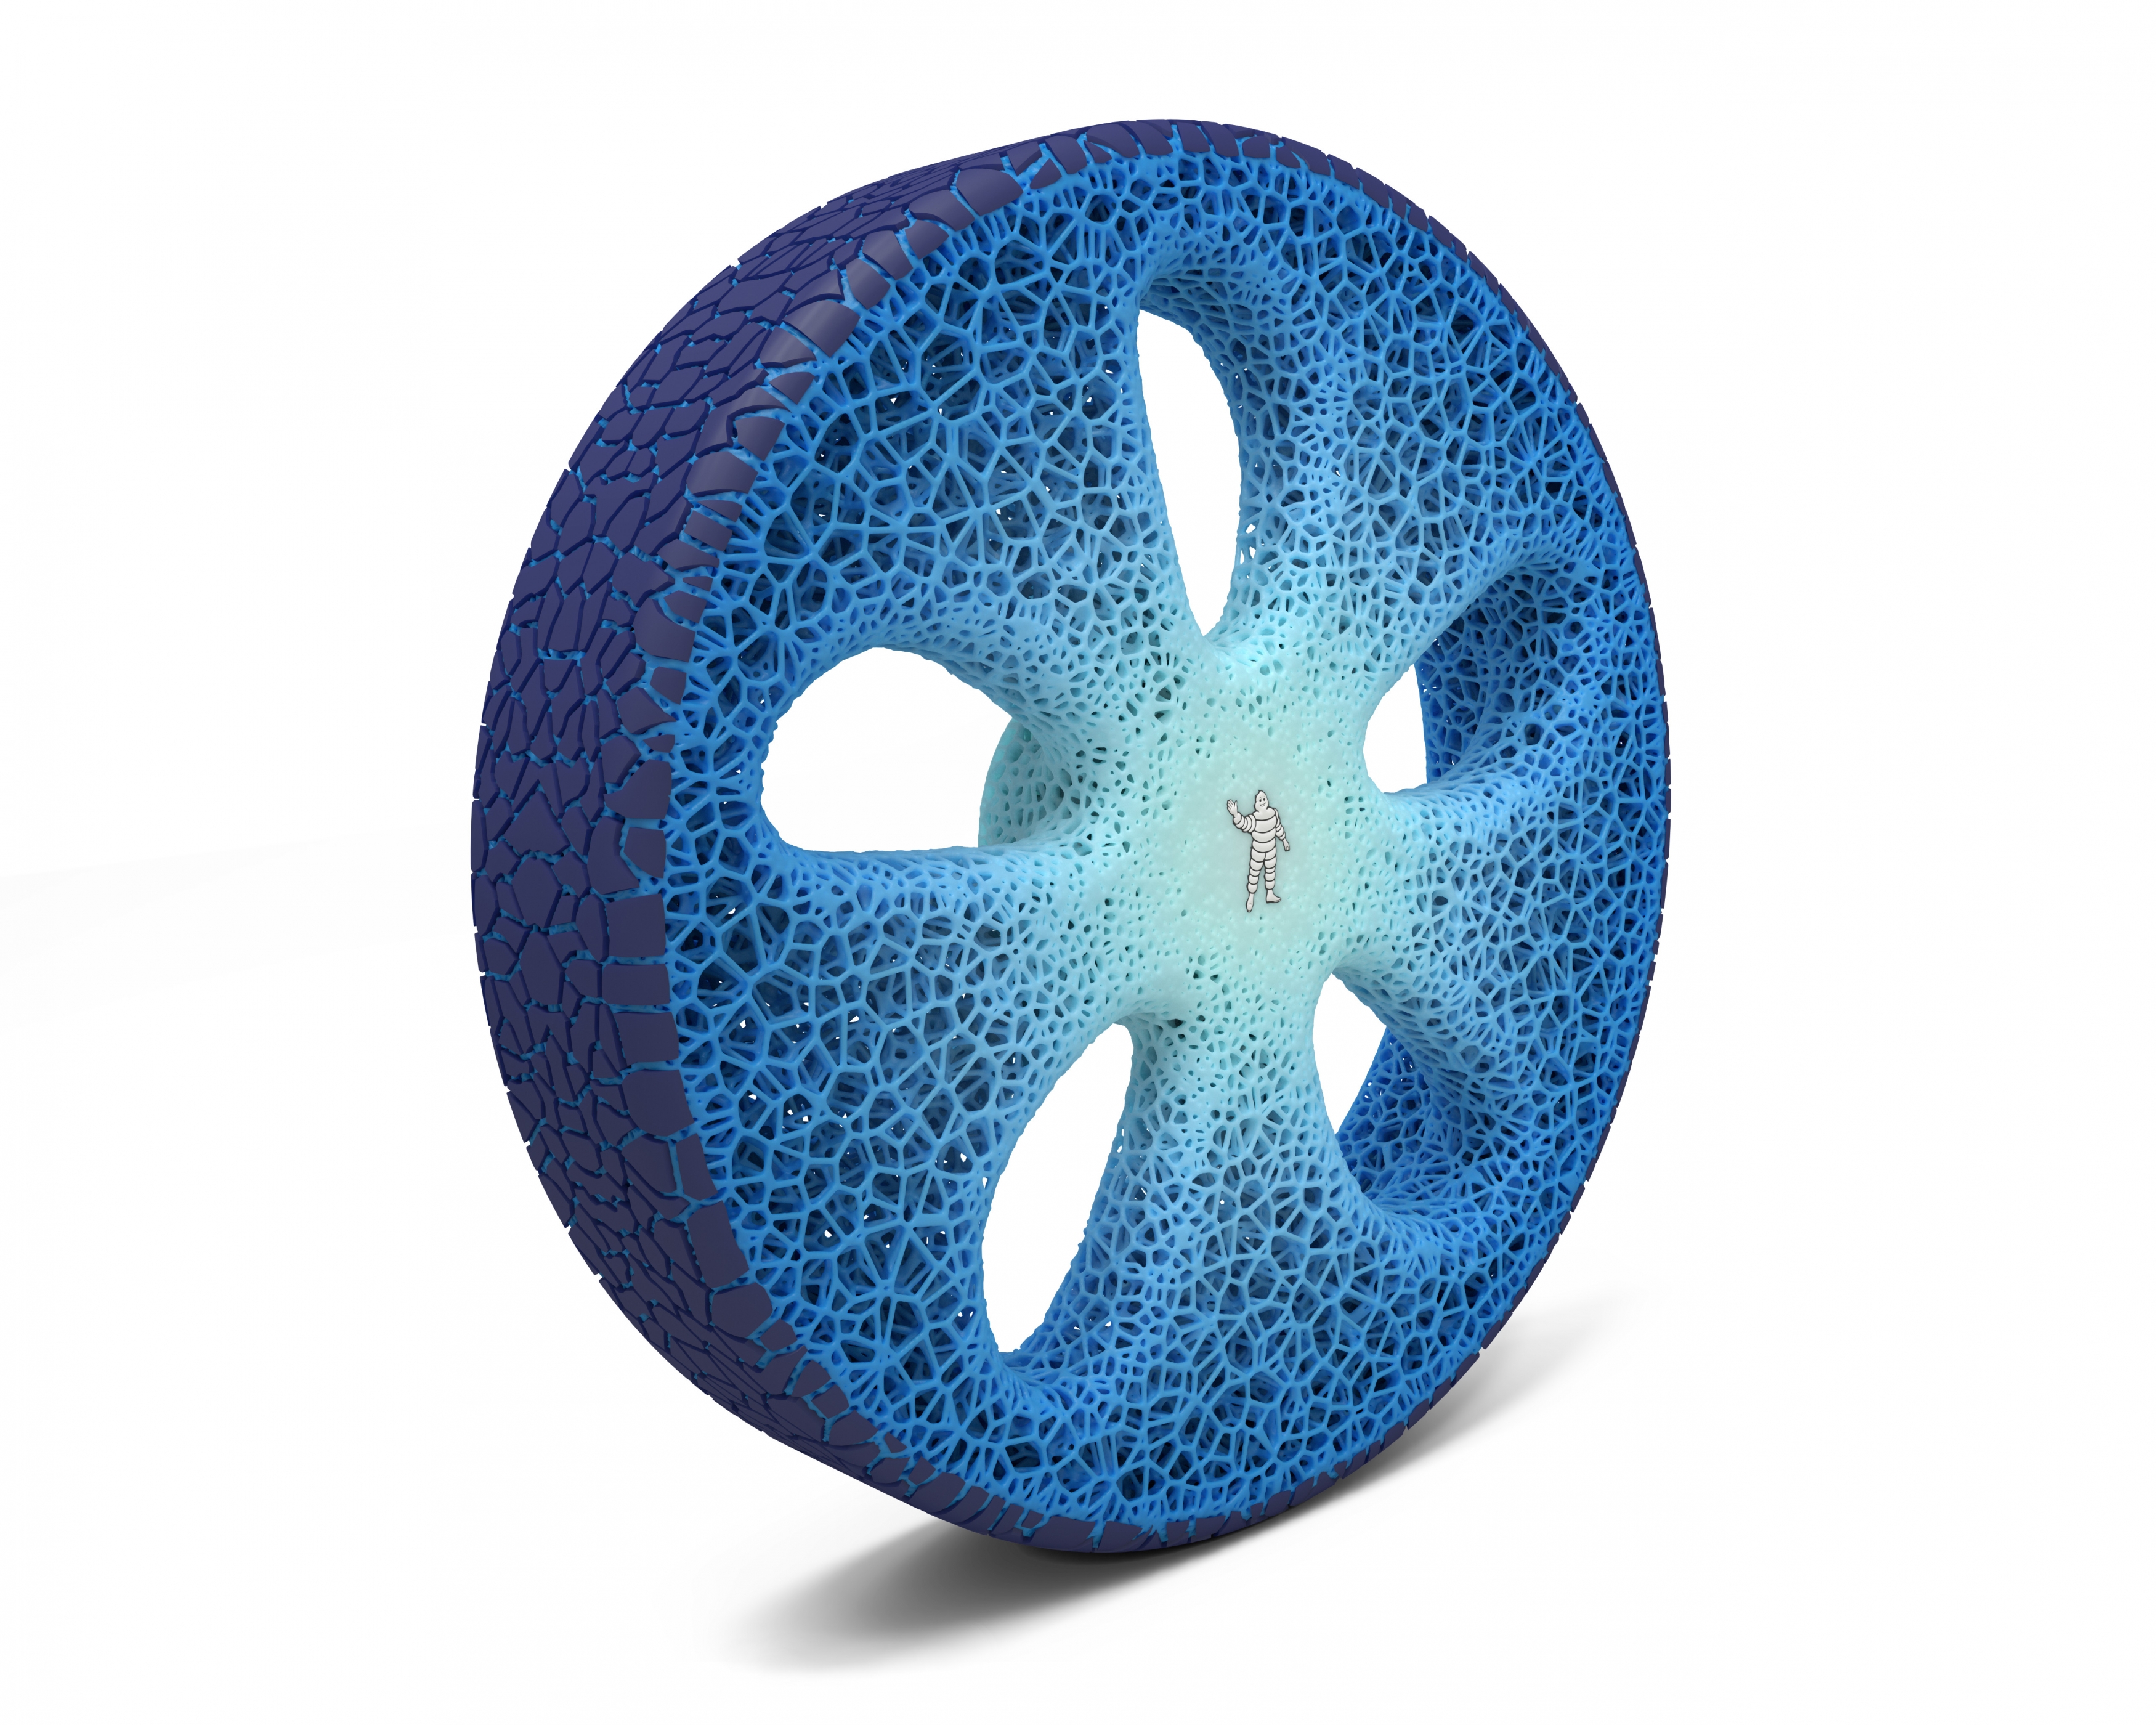 Michelin Vision Concept Tyre